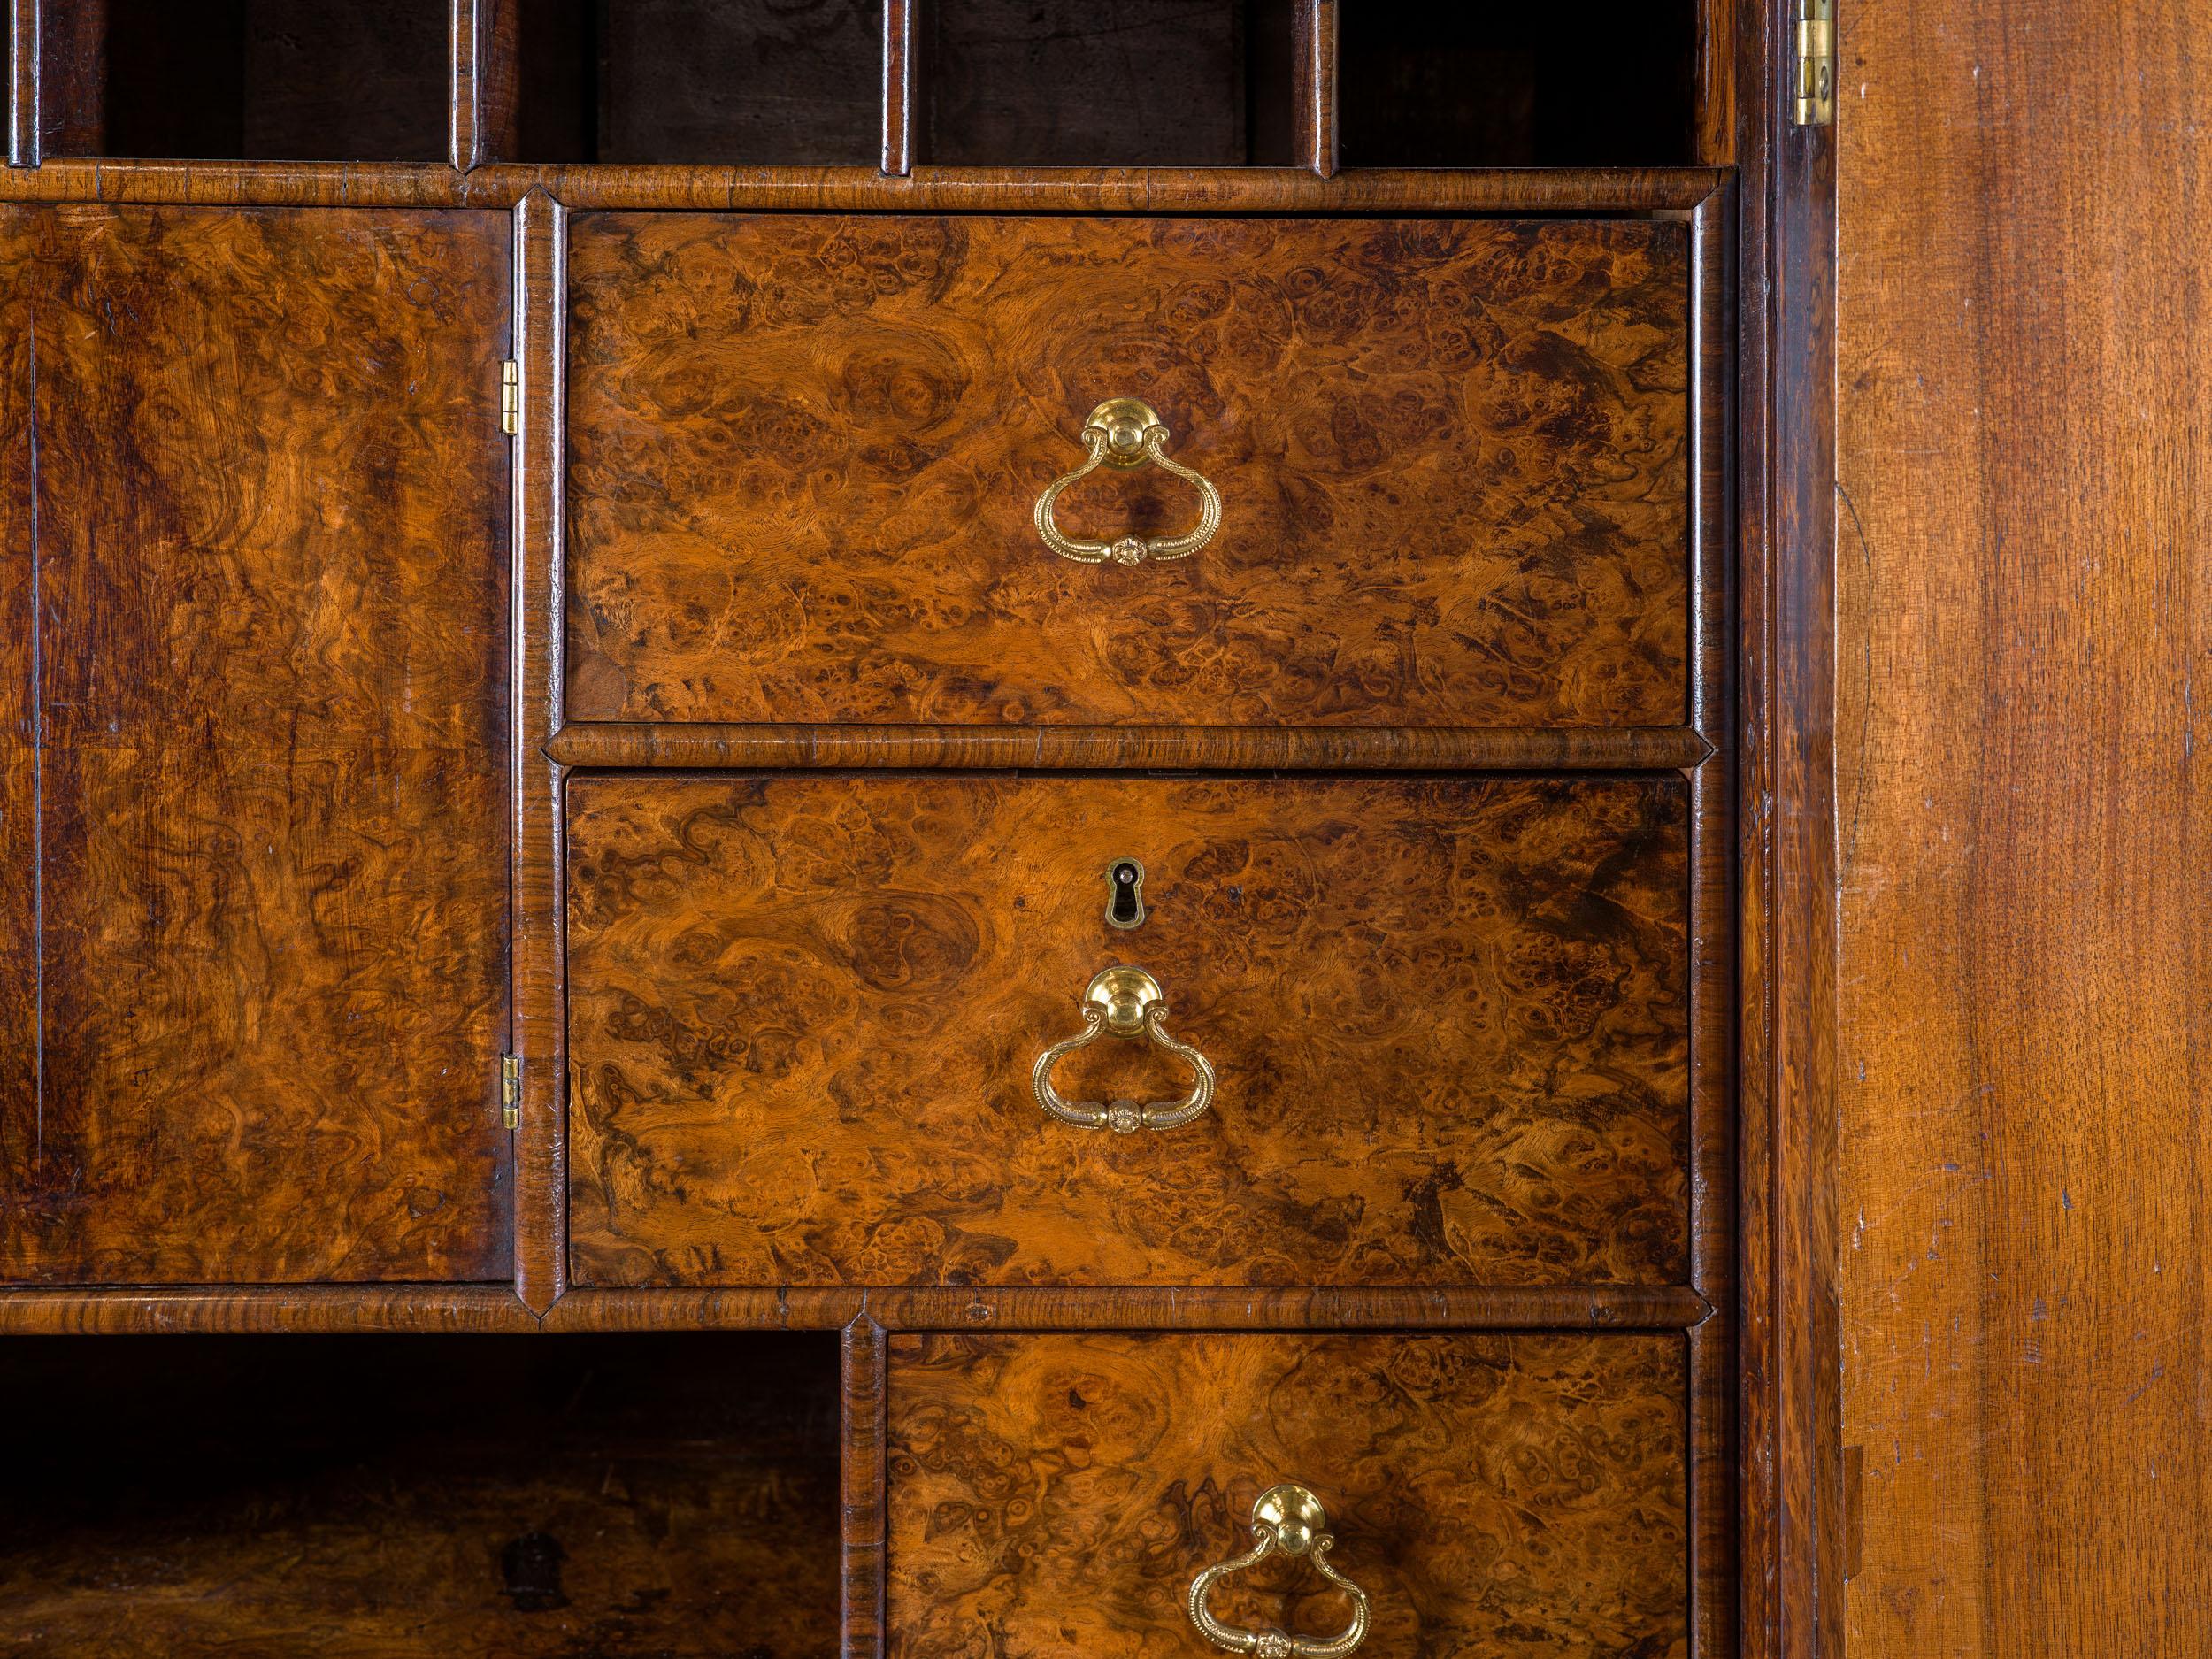 An unusual George I 'mulberry' cabinet in the manner of Coxed and Woster. The cross banded and veneered walnut doors reveal a fine fitted interior which is also beautiful veneered, including a number of hidden drawers, which are beautifully